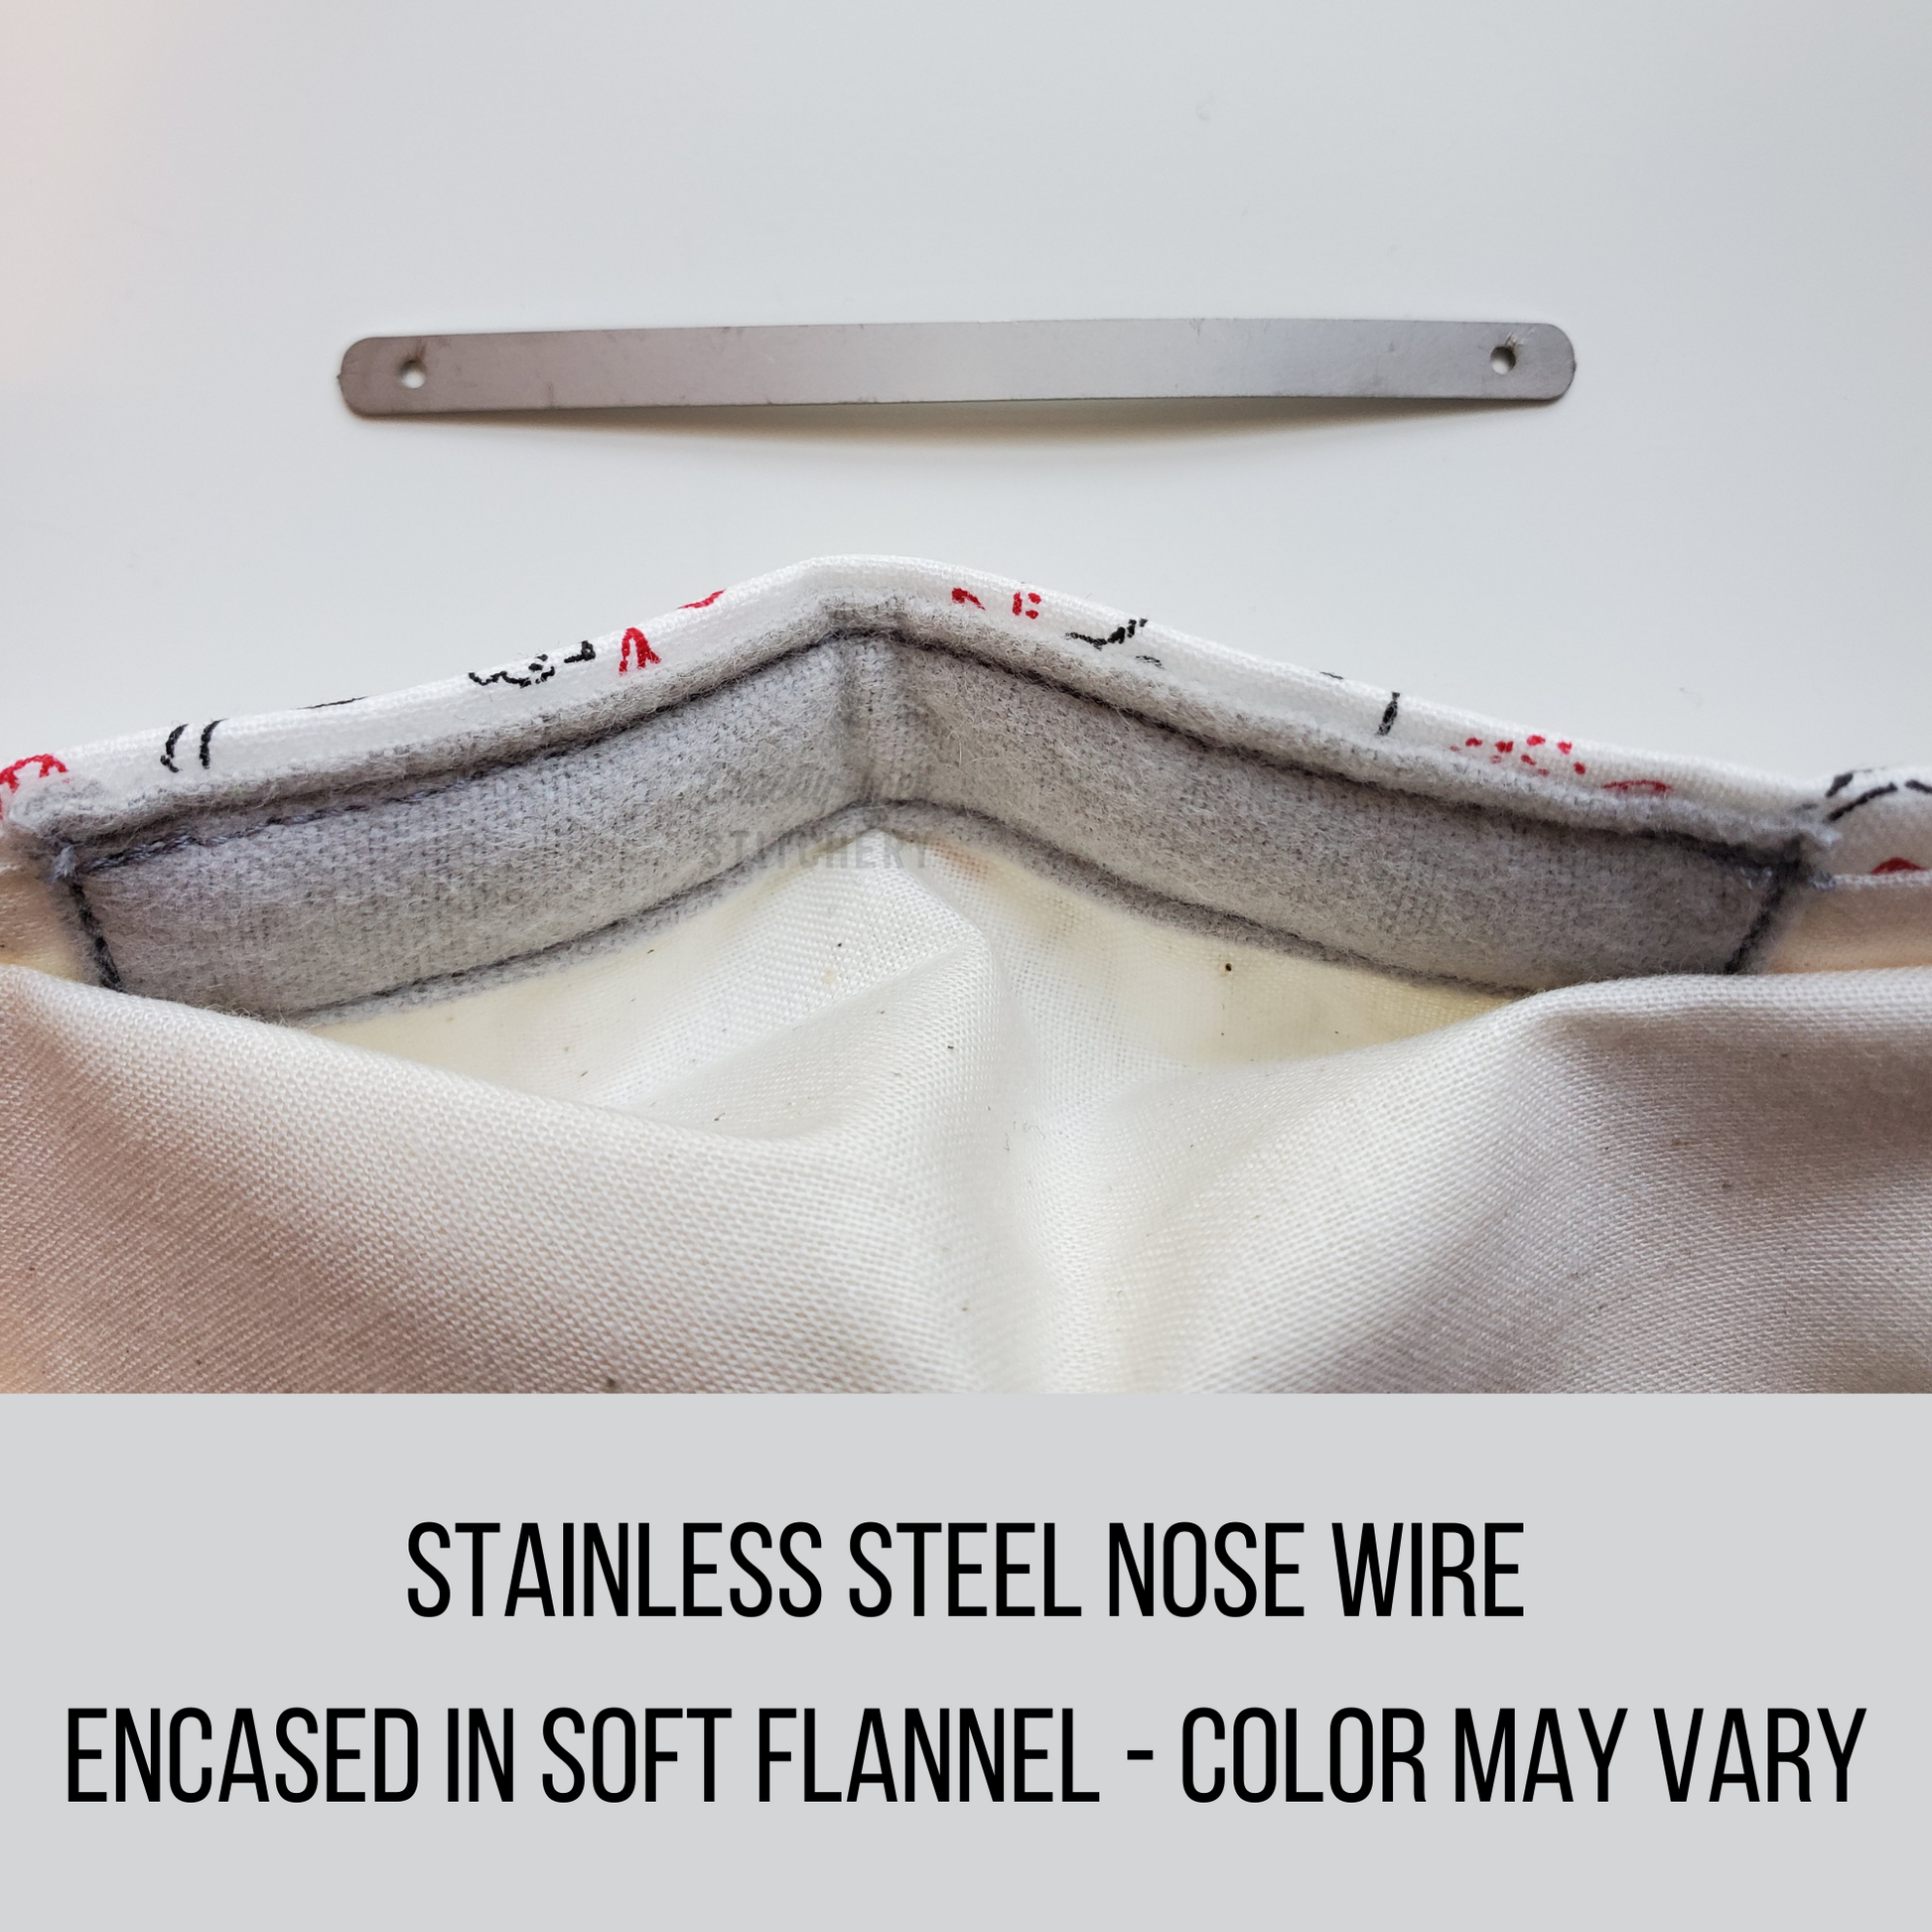 A separate flat stainless steel nose wire and close-up of the inside of the mask to show the wire. Text reads "stainless steel nose wire encased in soft flannel - color may vary."